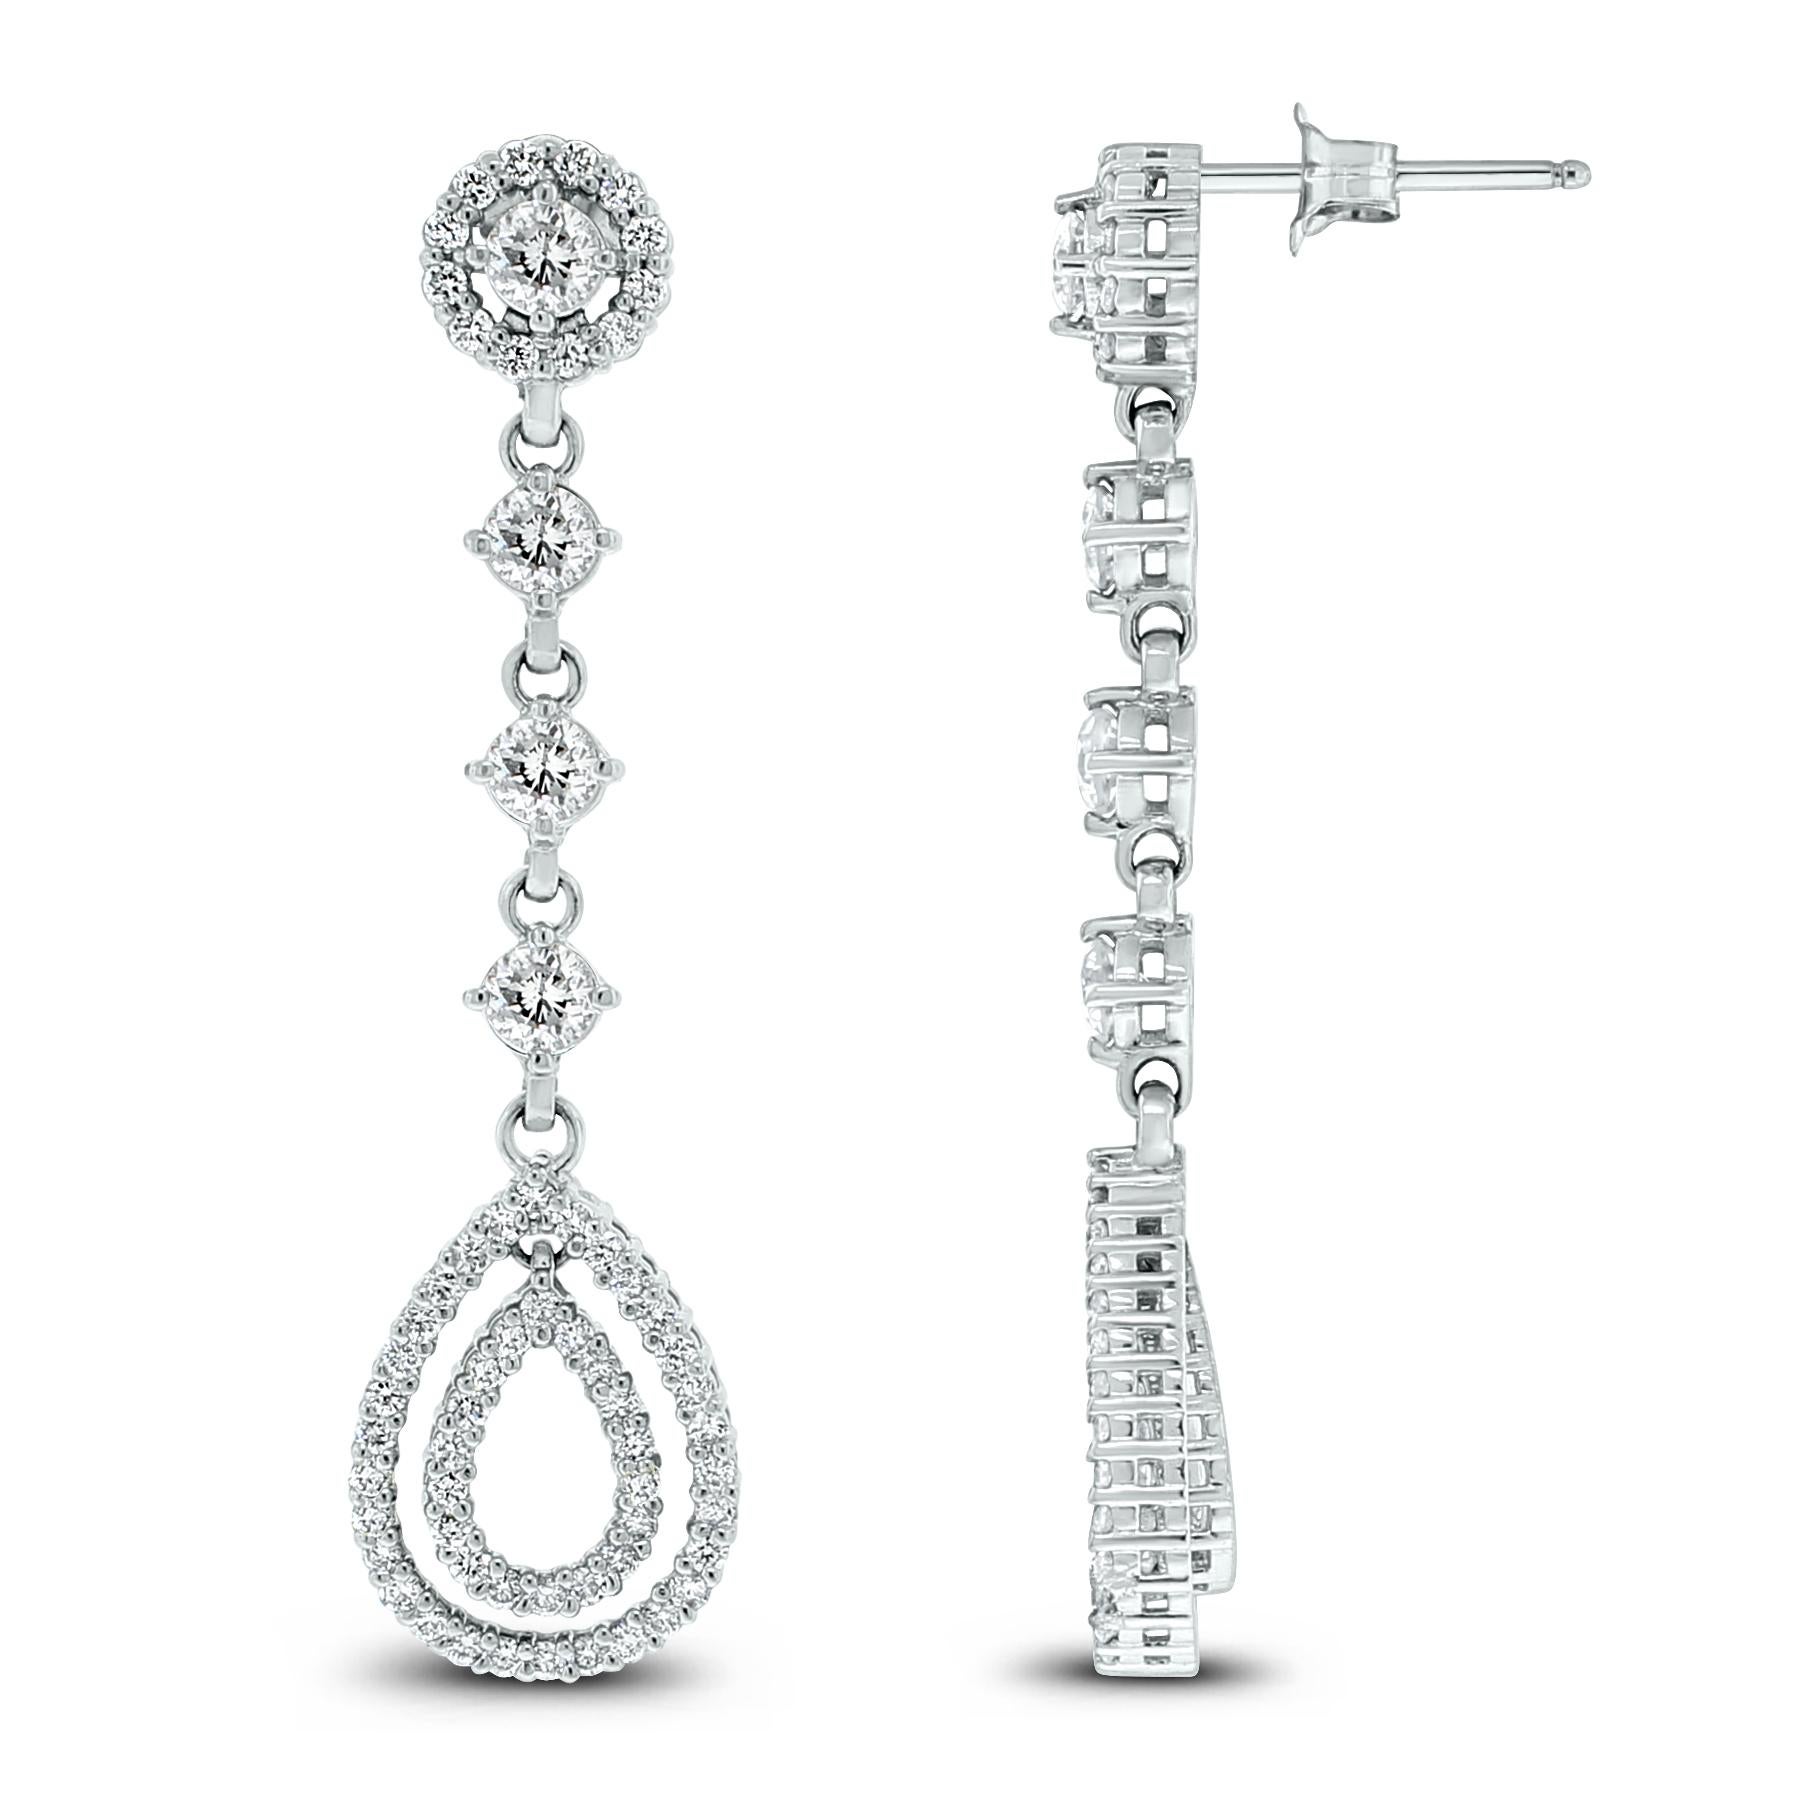 Contemporary Beauvince Dangling Halo 2.02 Carat Diamond Earrings in White Gold For Sale